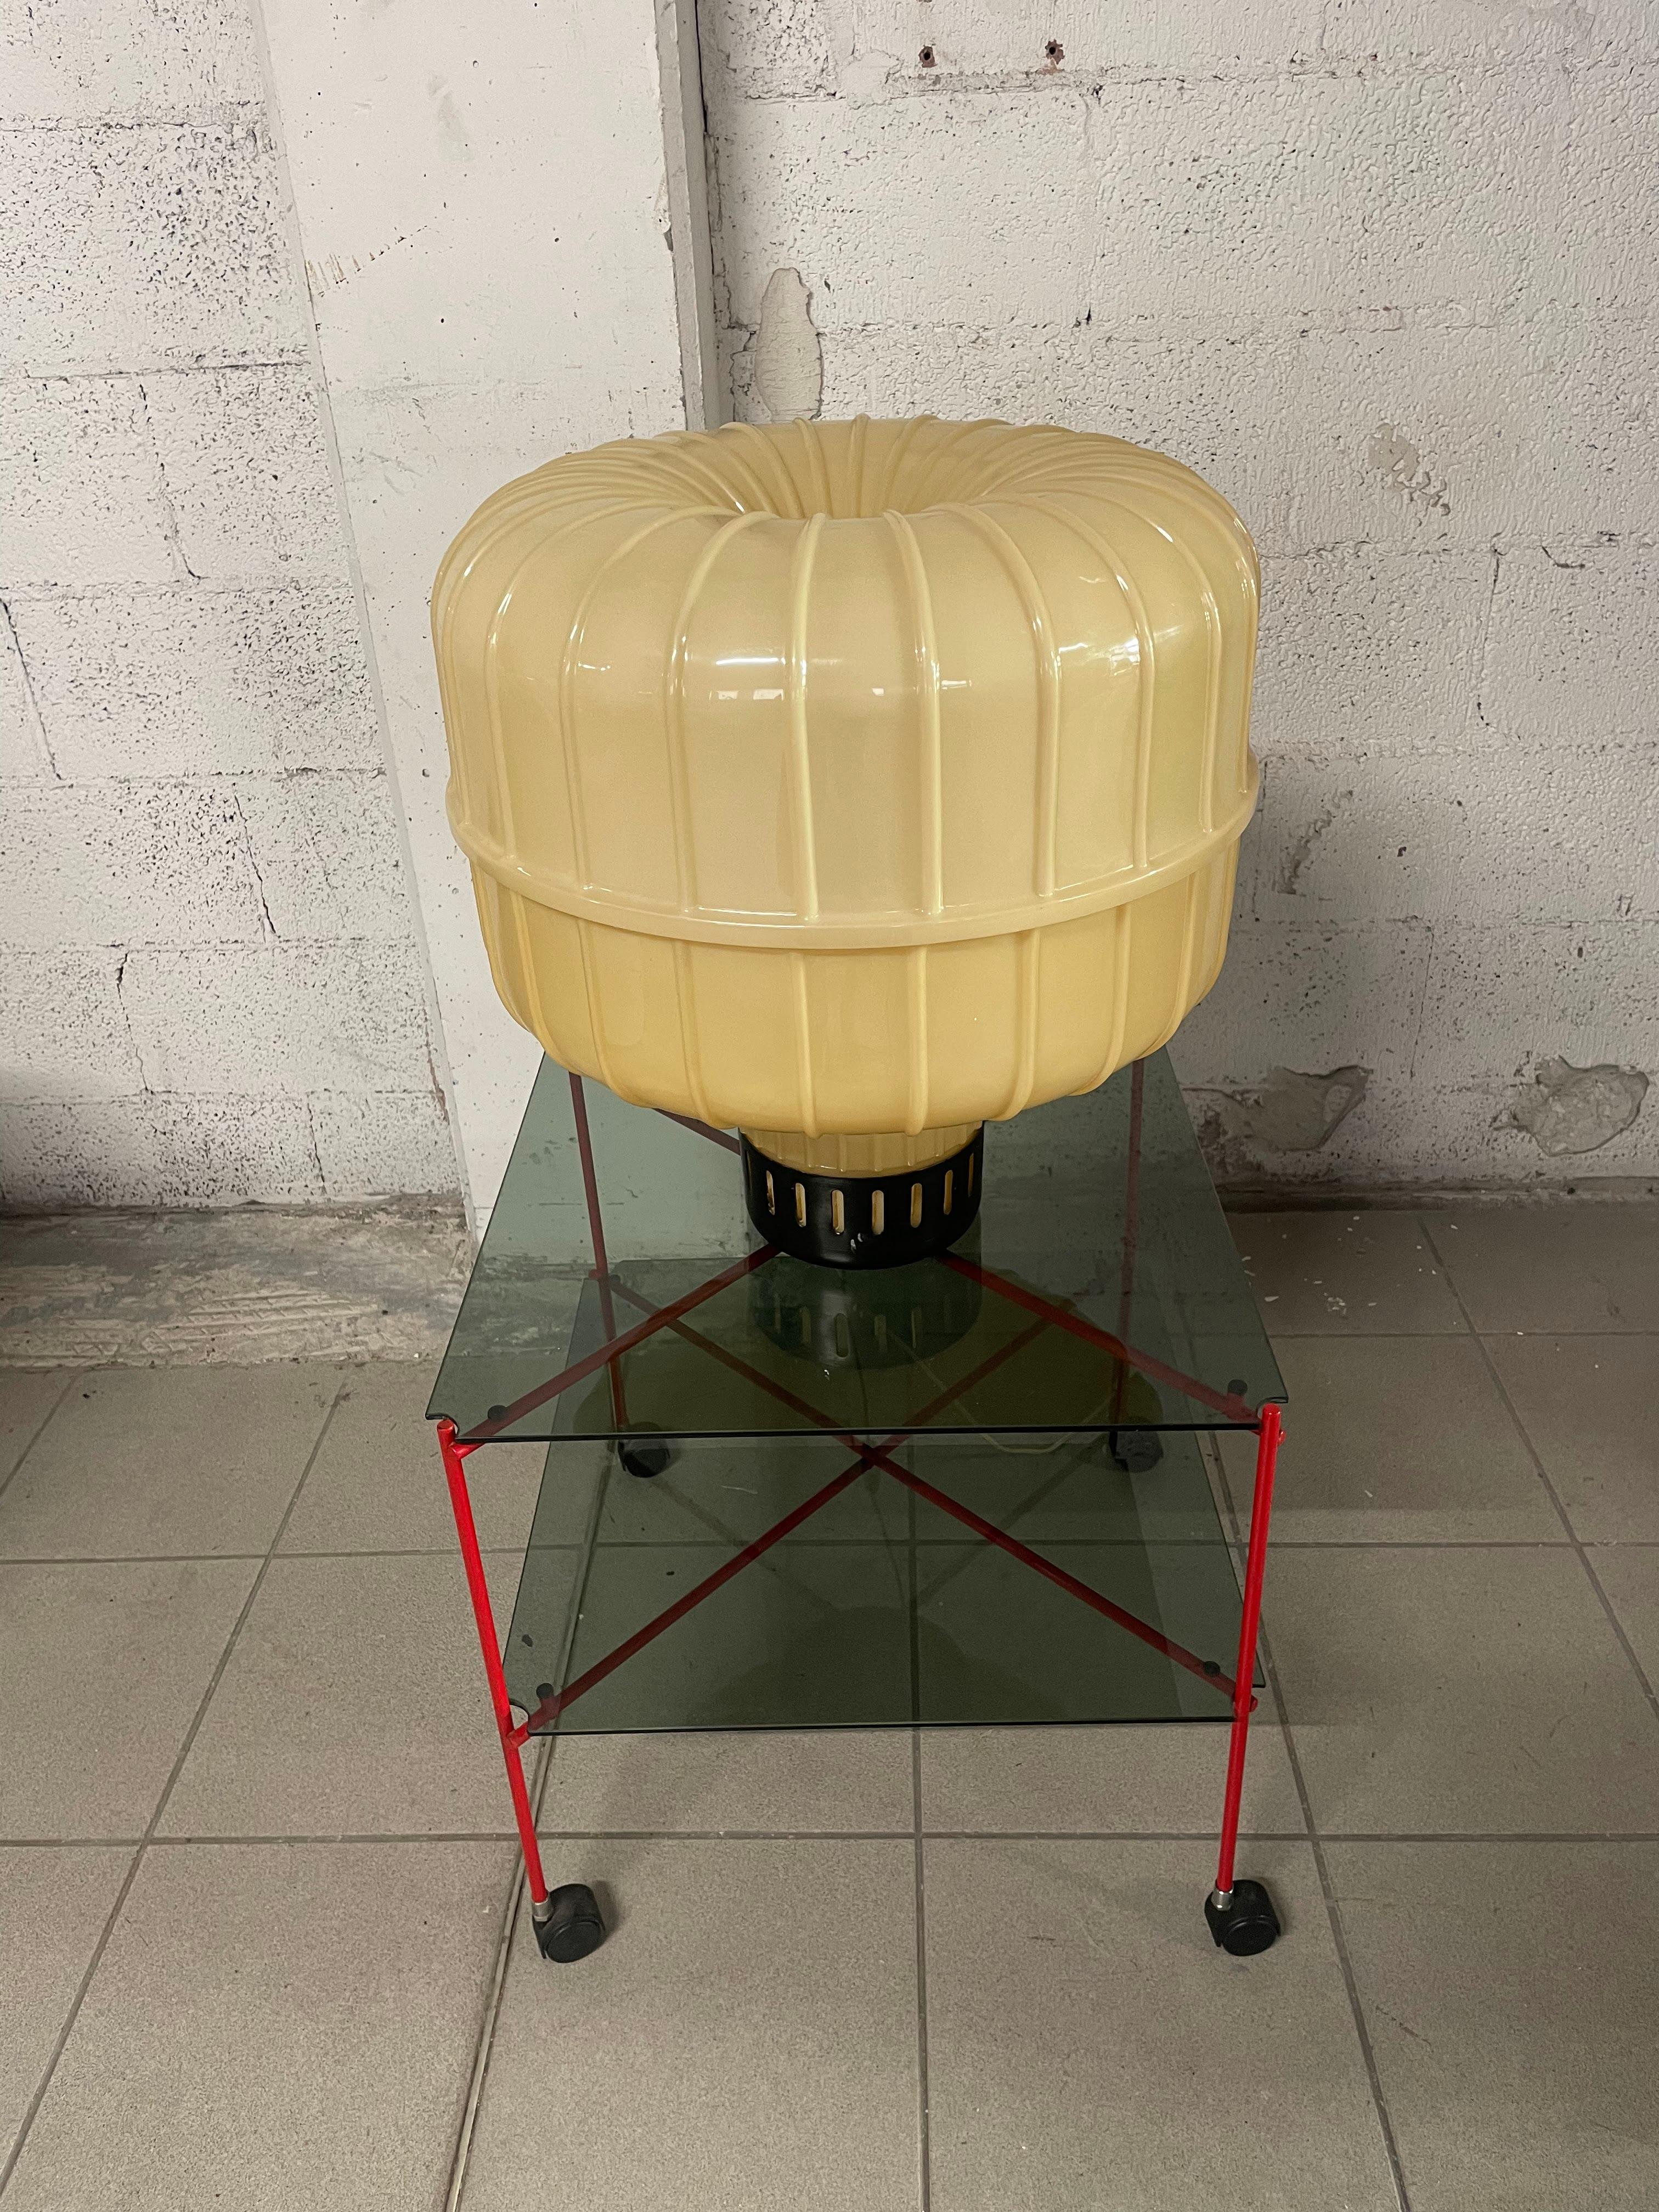 1970s table lamp with large plastic shade and black painted metal base.

Wire, switch and plug still original.
Fits an E27 bulb